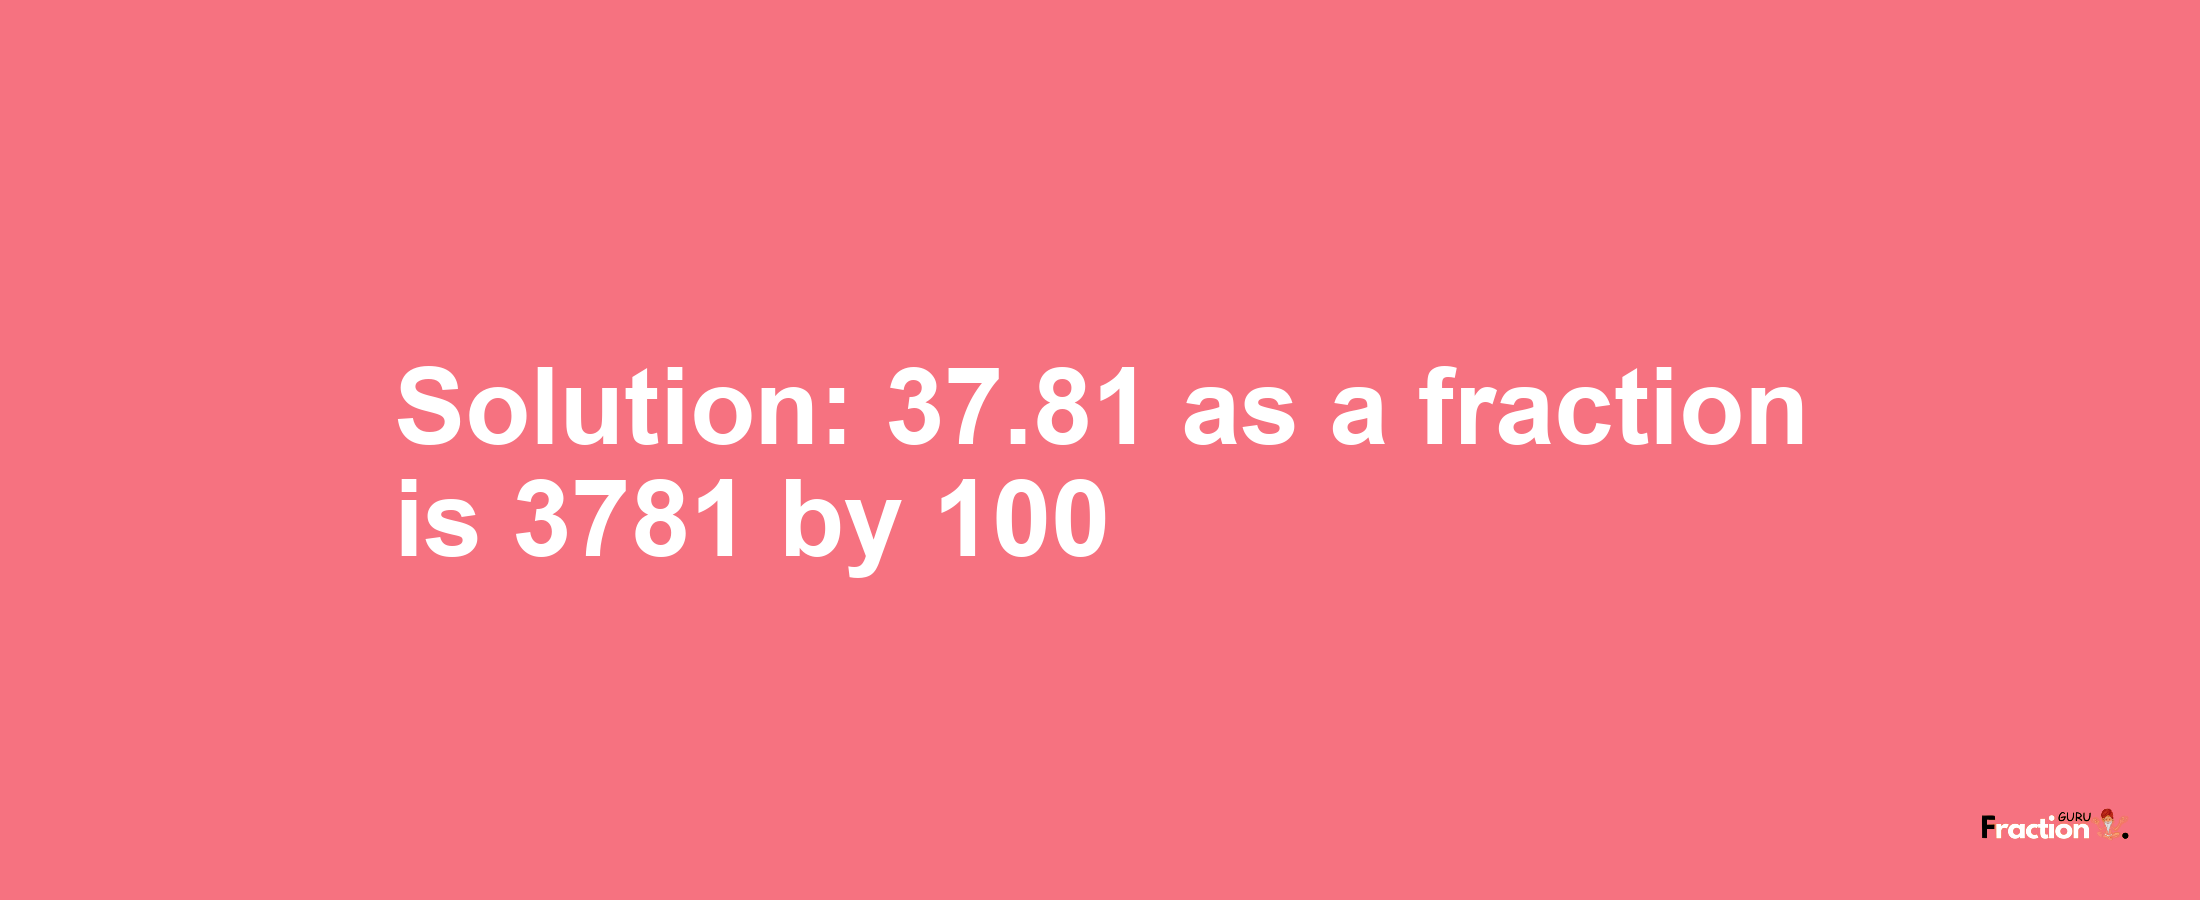 Solution:37.81 as a fraction is 3781/100